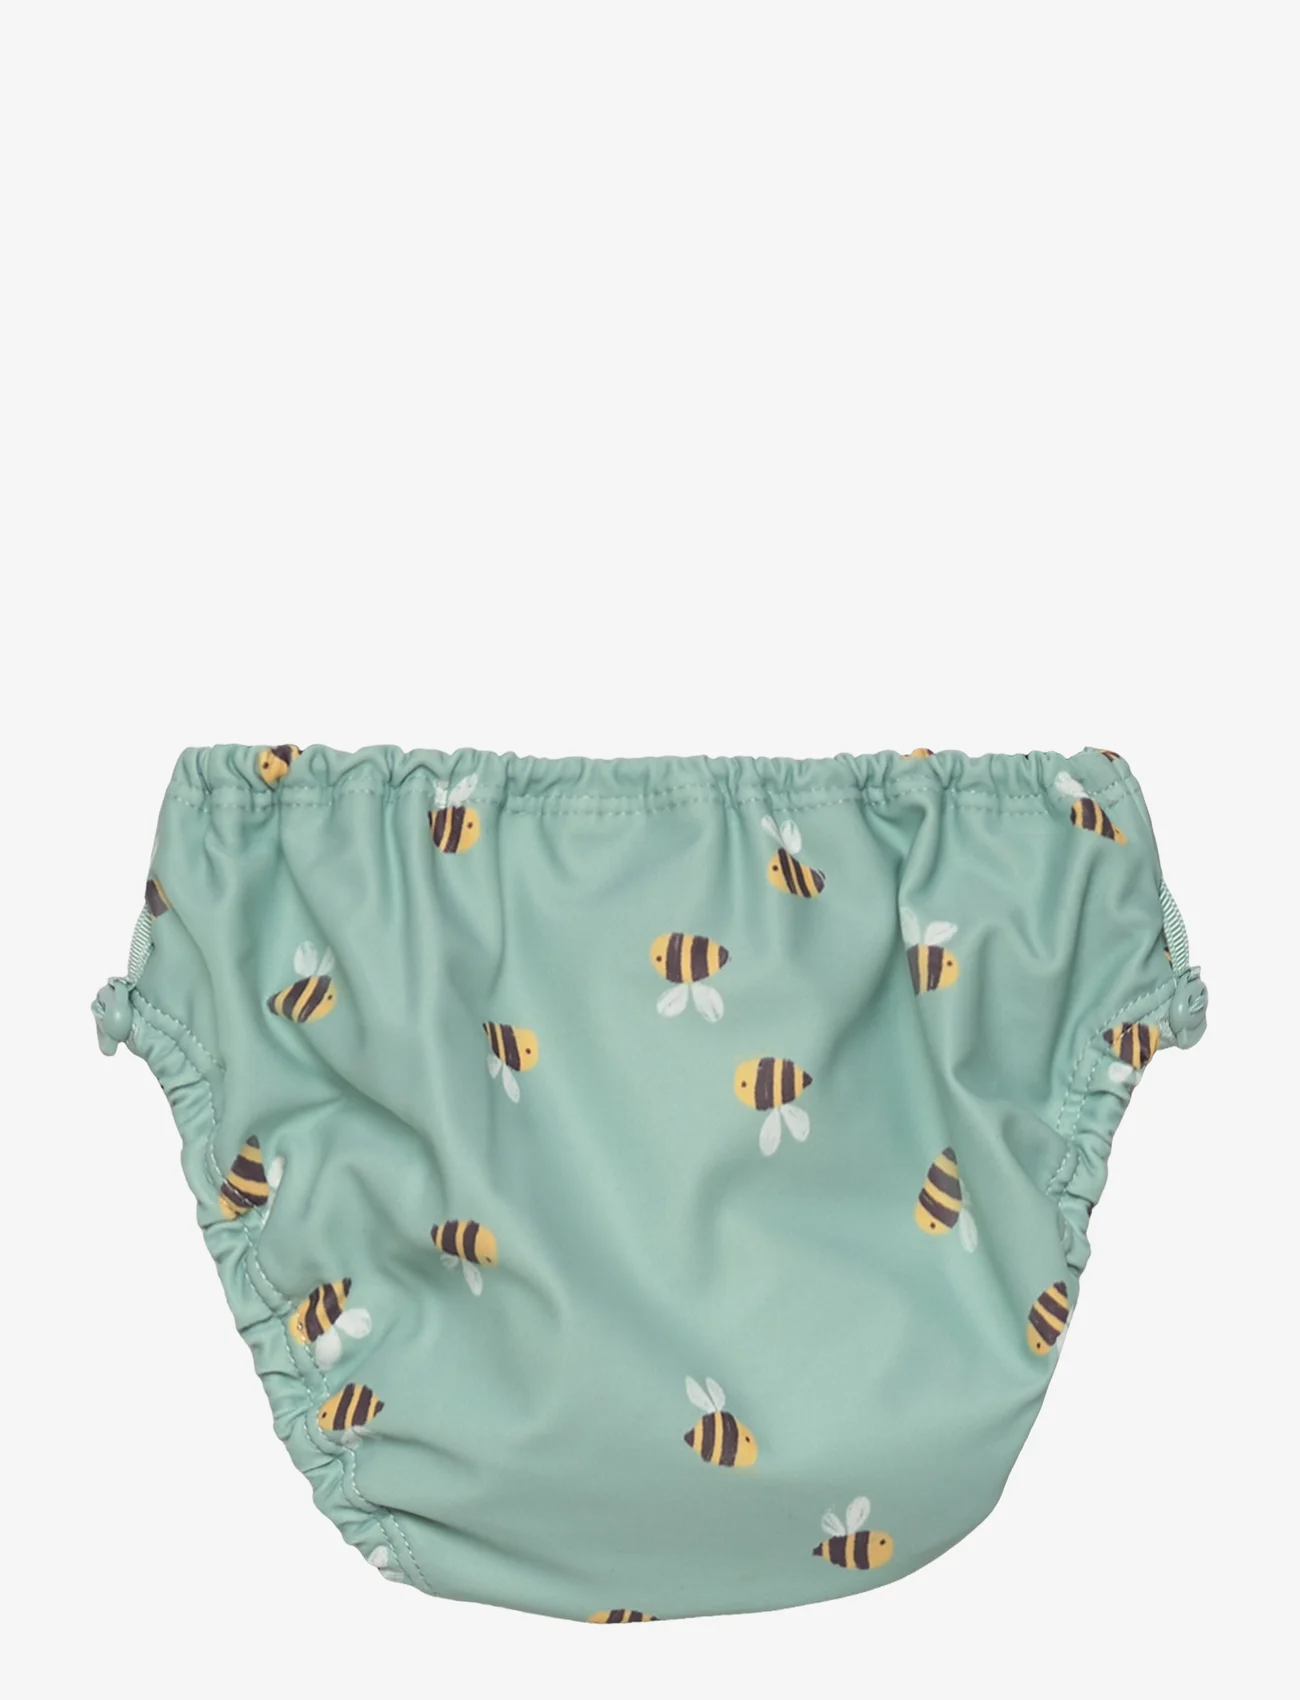 Lindex - Floaties animal and aop - sommerschnäppchen - light dusty turquoise - 1